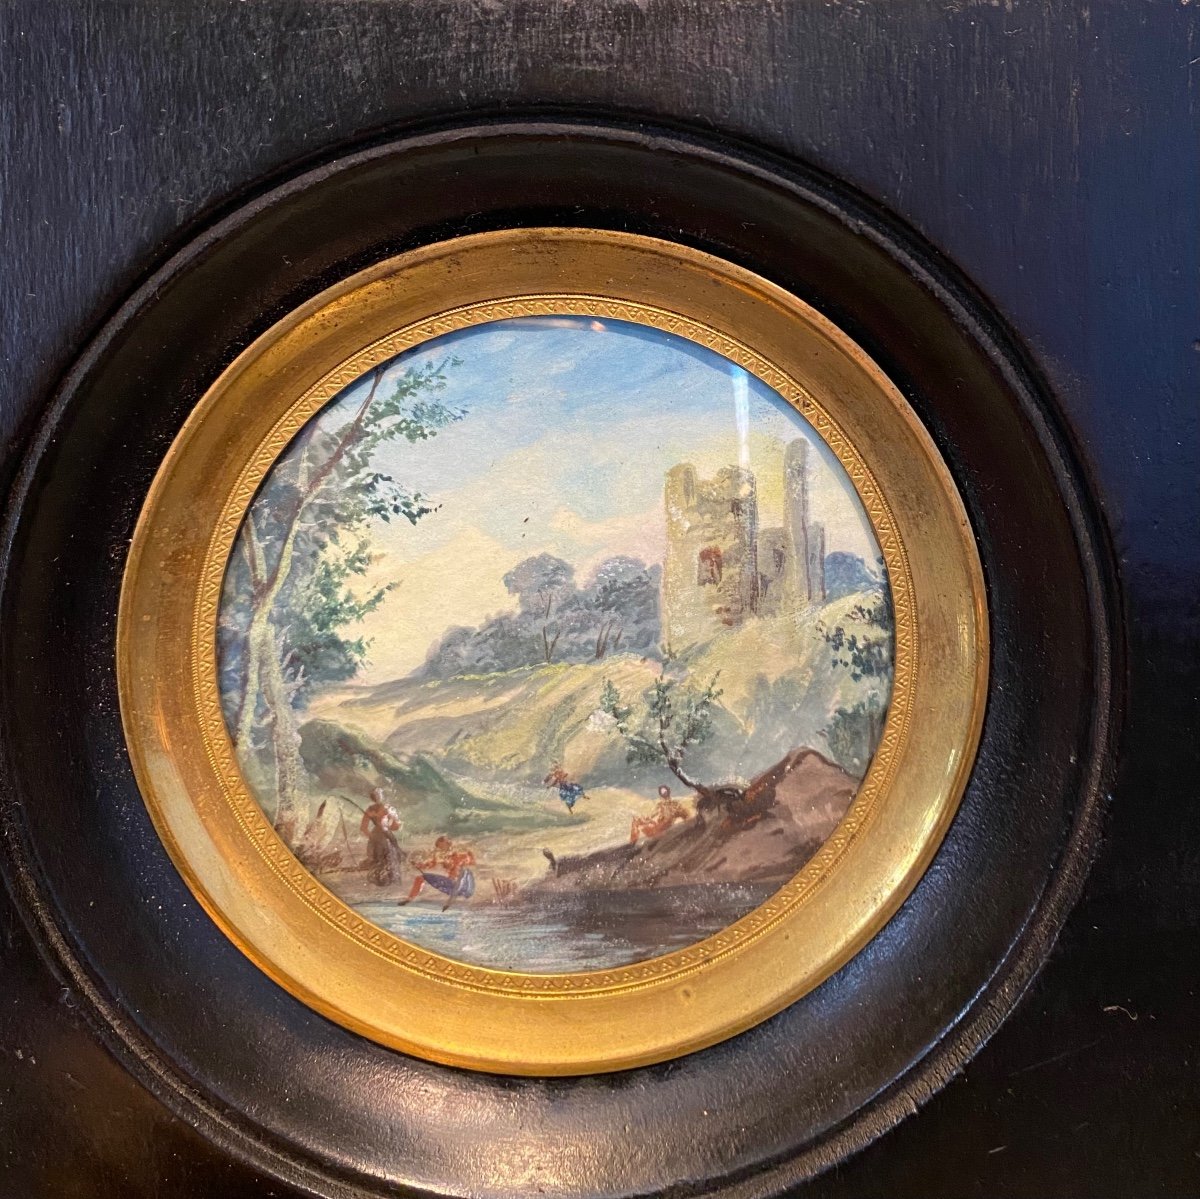 Landscape In Miniature From The 18th Century-photo-2